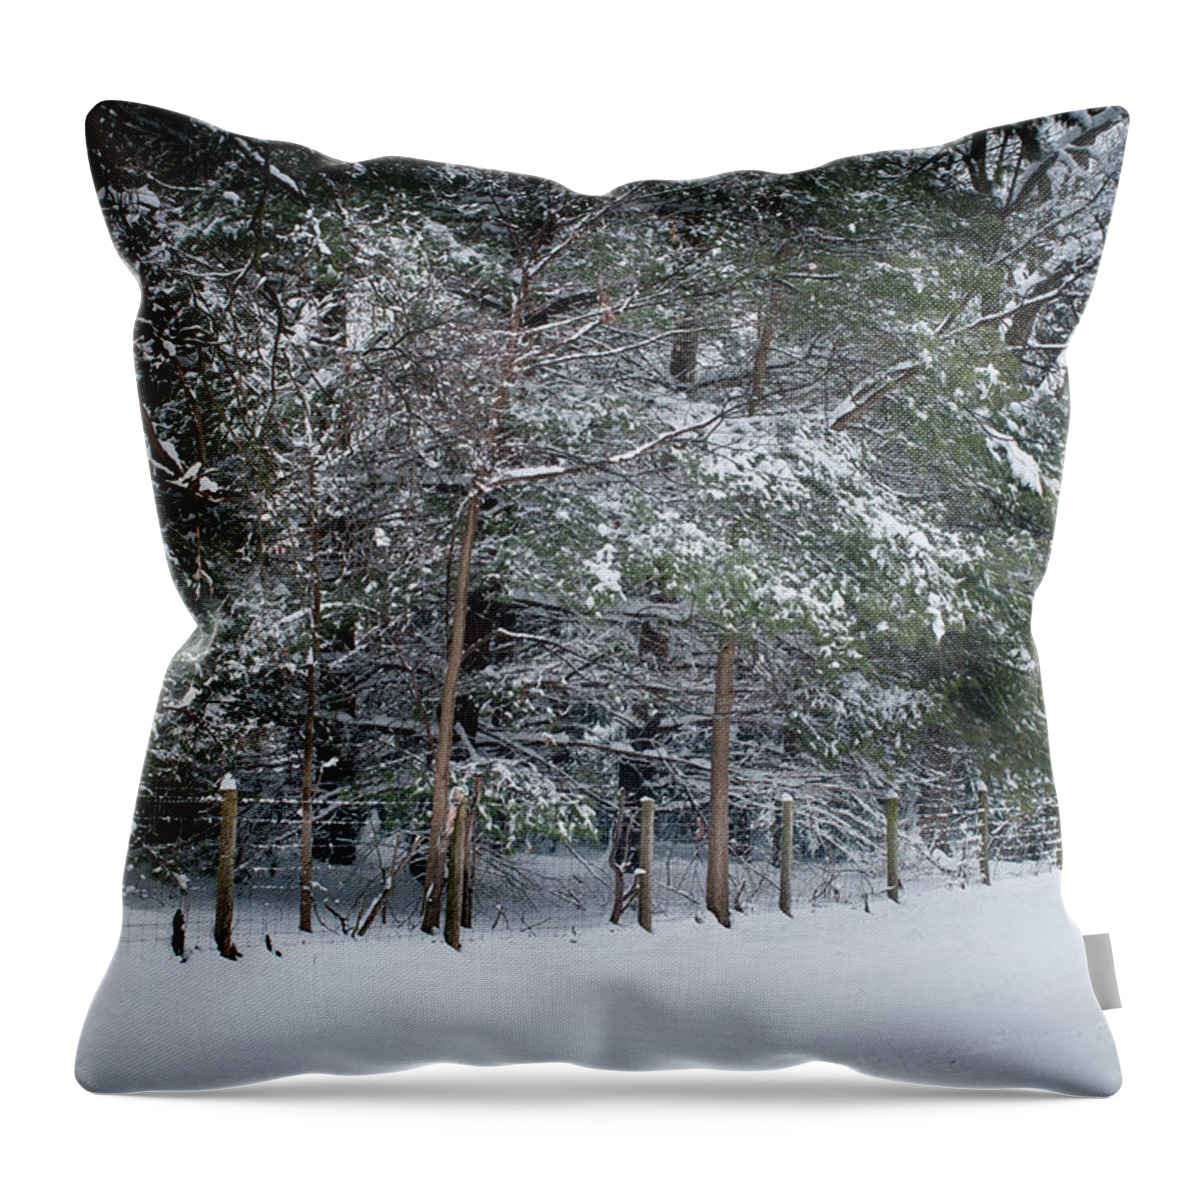 2018 Throw Pillow featuring the photograph Snow Day 3, Fieldwork, Hunter Hill, Hagerstown, Maryla by James Oppenheim